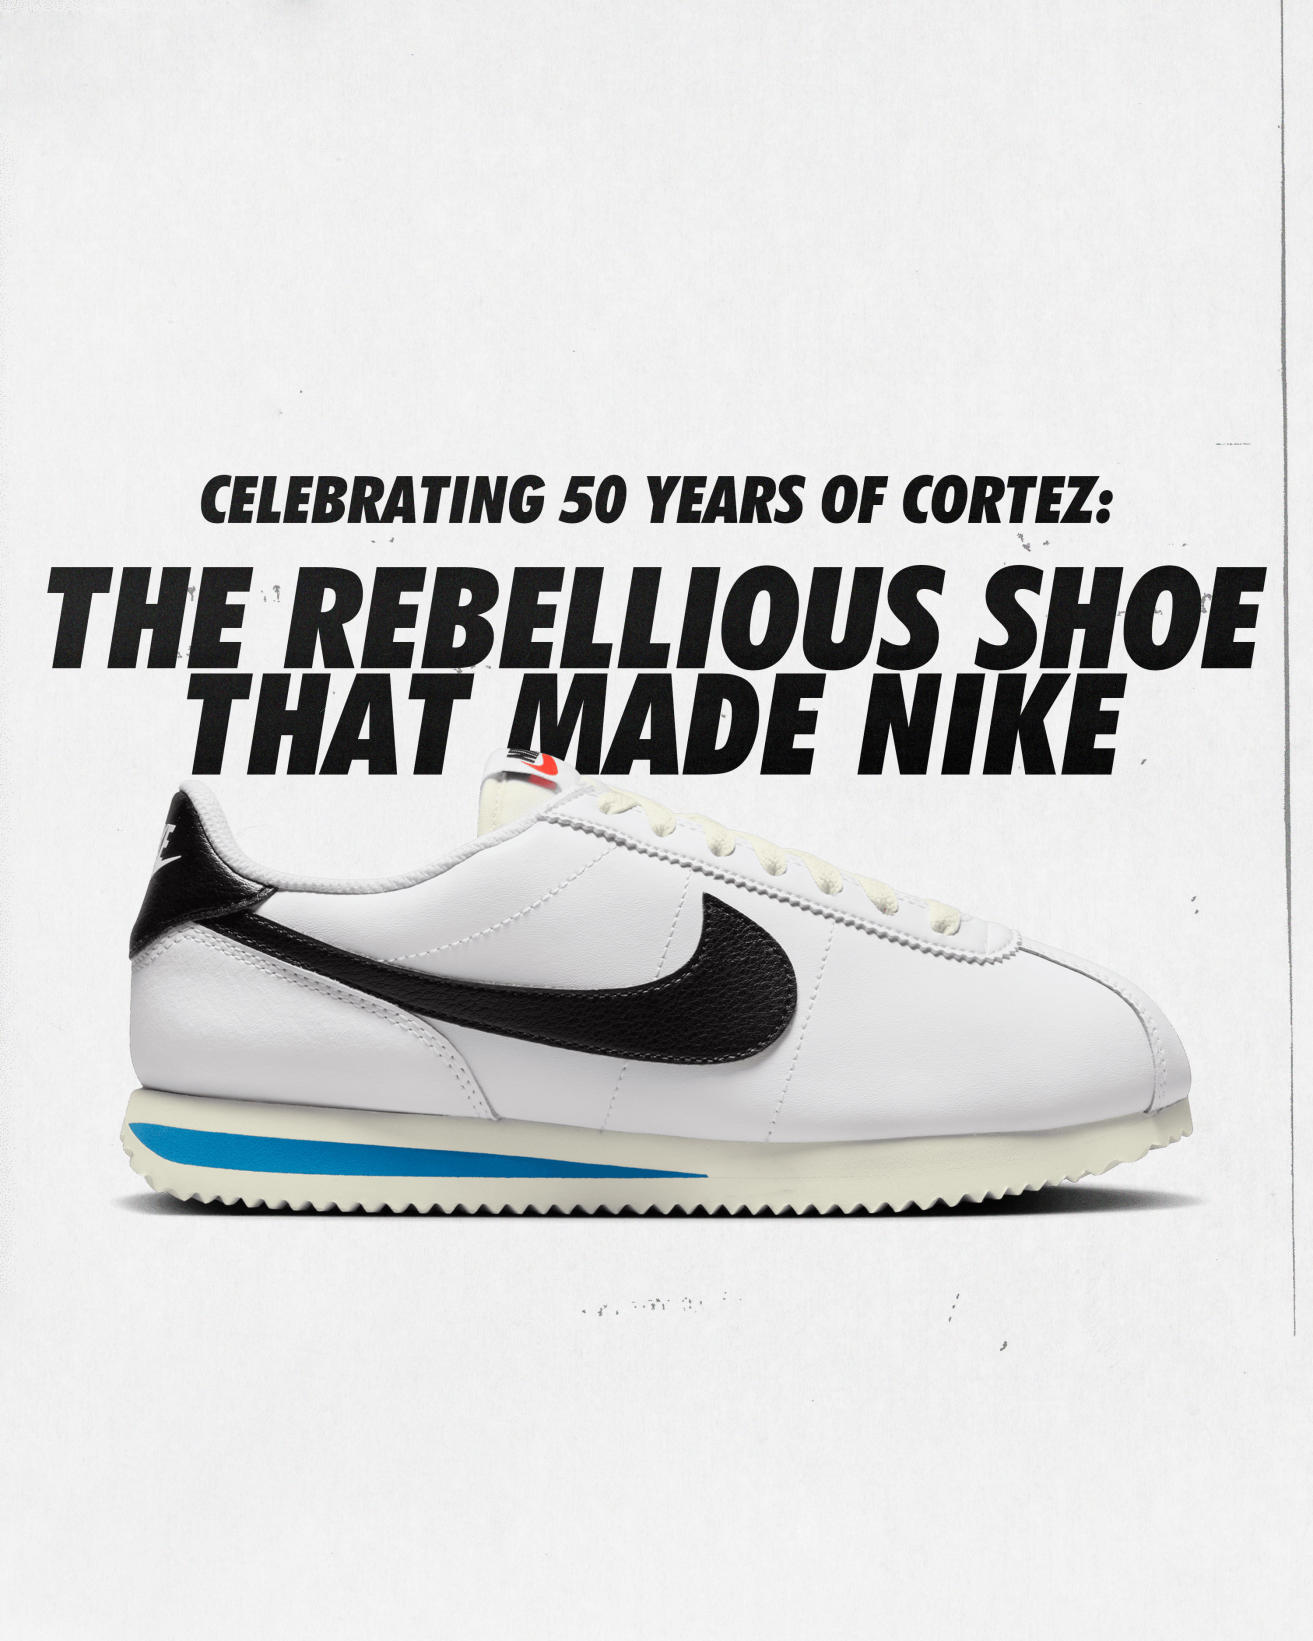 Nike the iconic sneaker image éditorial. Illustration du lifestyle